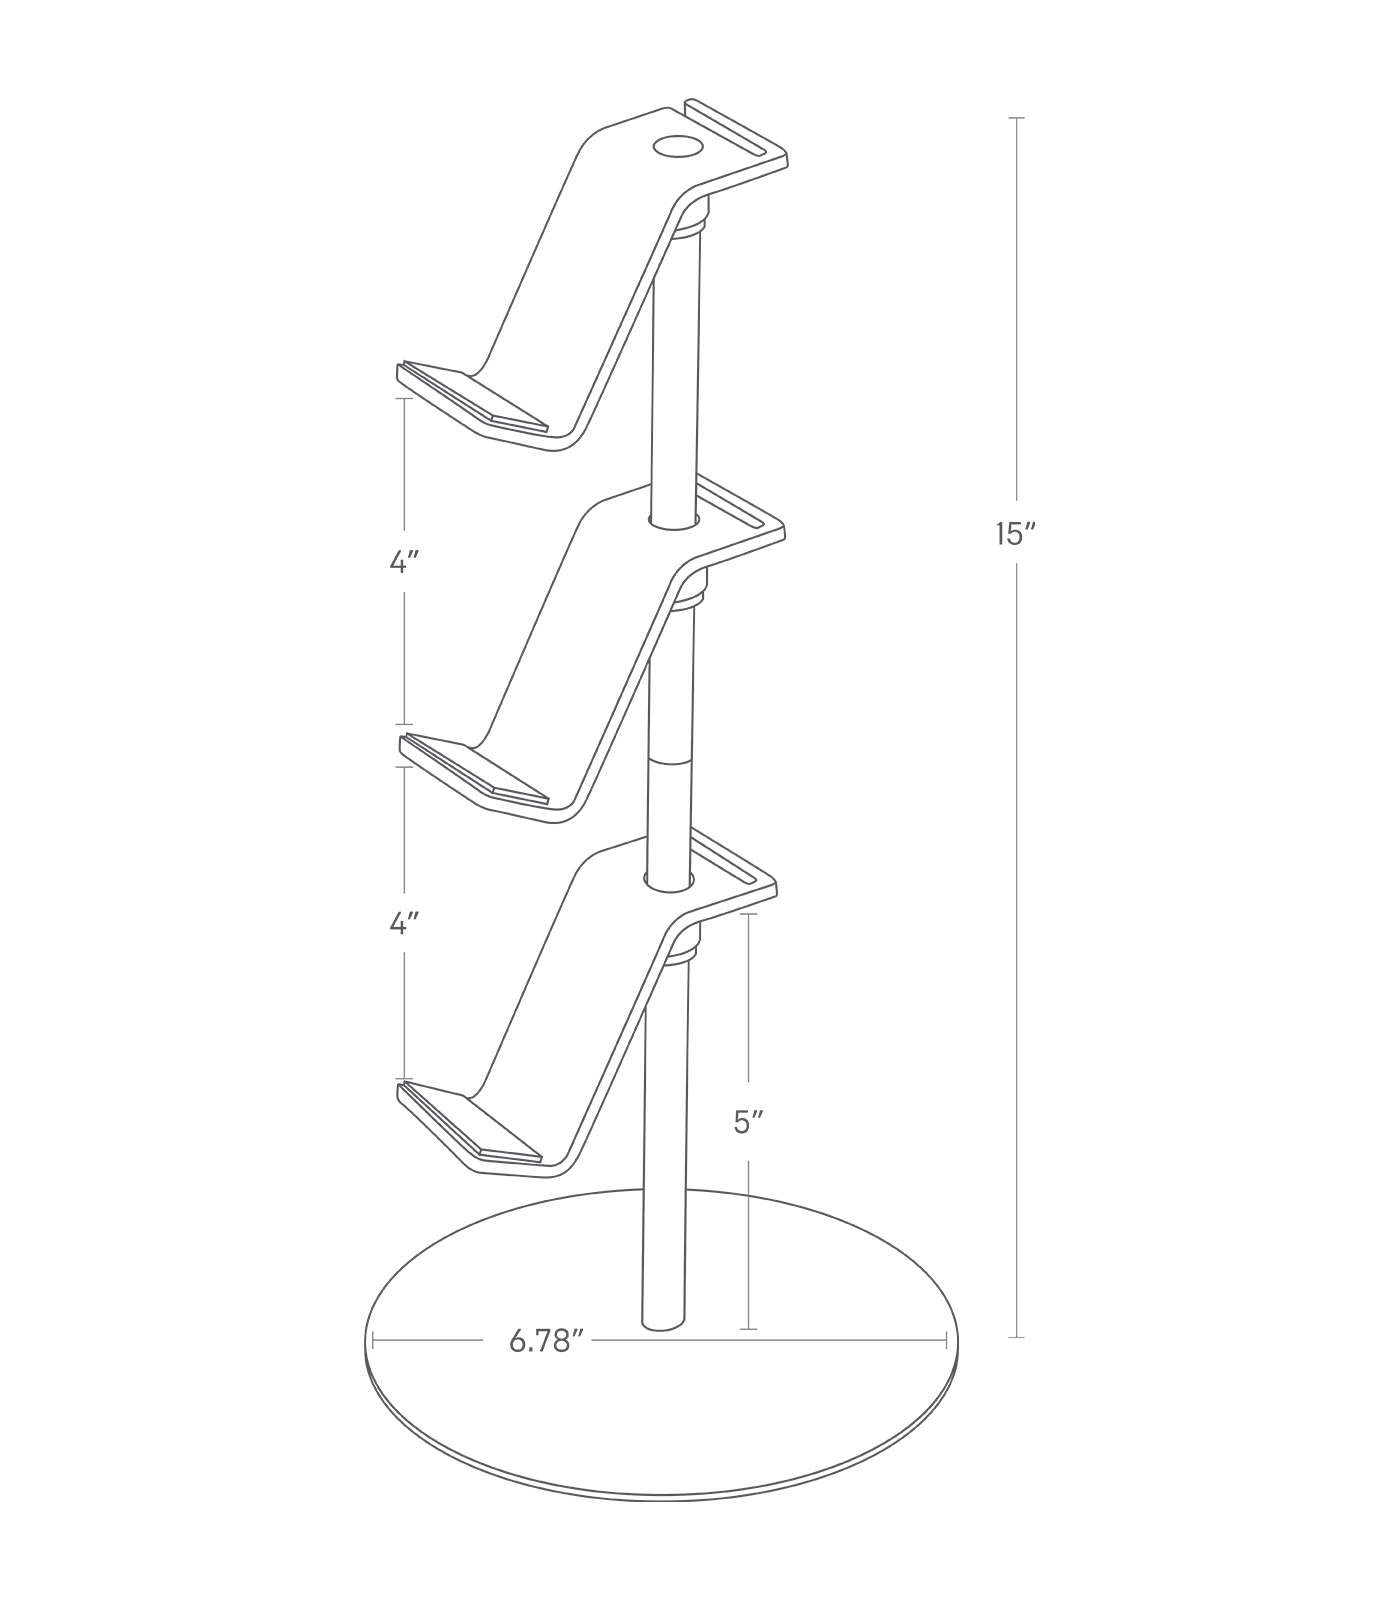 Dimension Image for a Controller Stand on a white background showing a height of 15